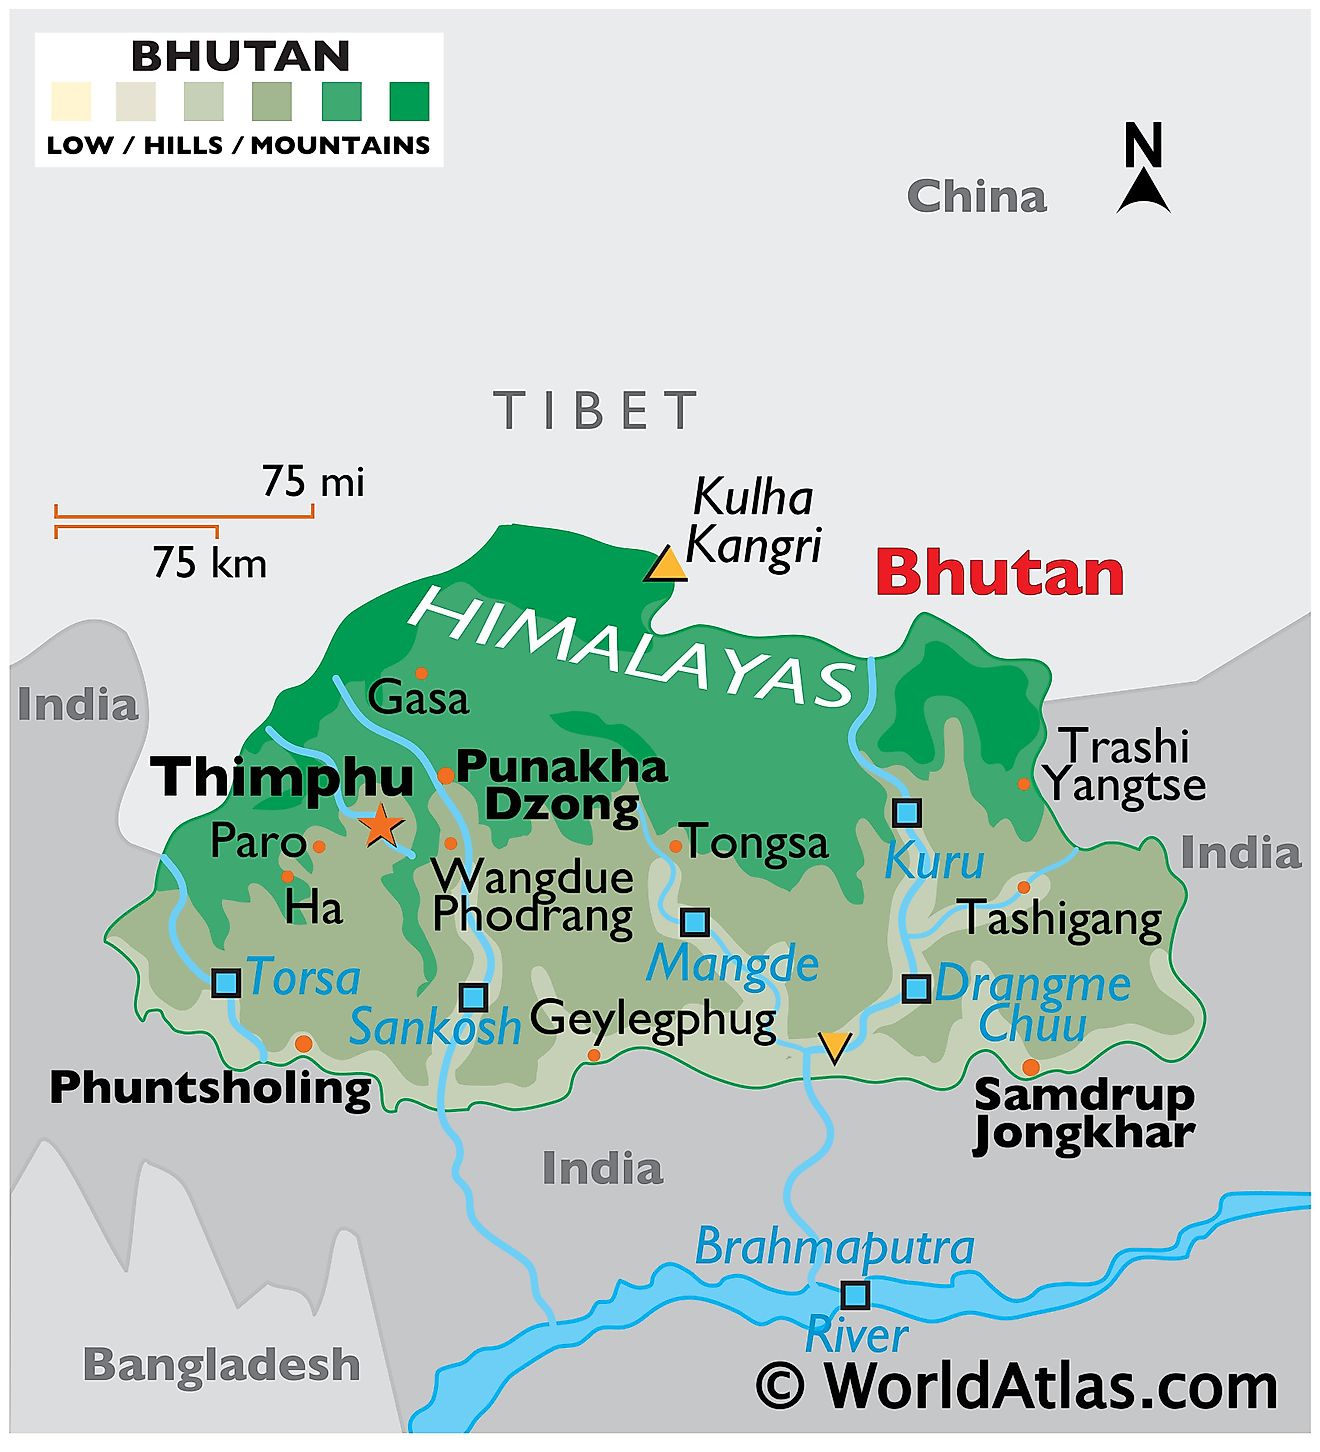 Physical Map of the Kingdom of Bhutan showing relief, the Himalayan range, major rivers, bordering countries, highest and lowest points, and more.